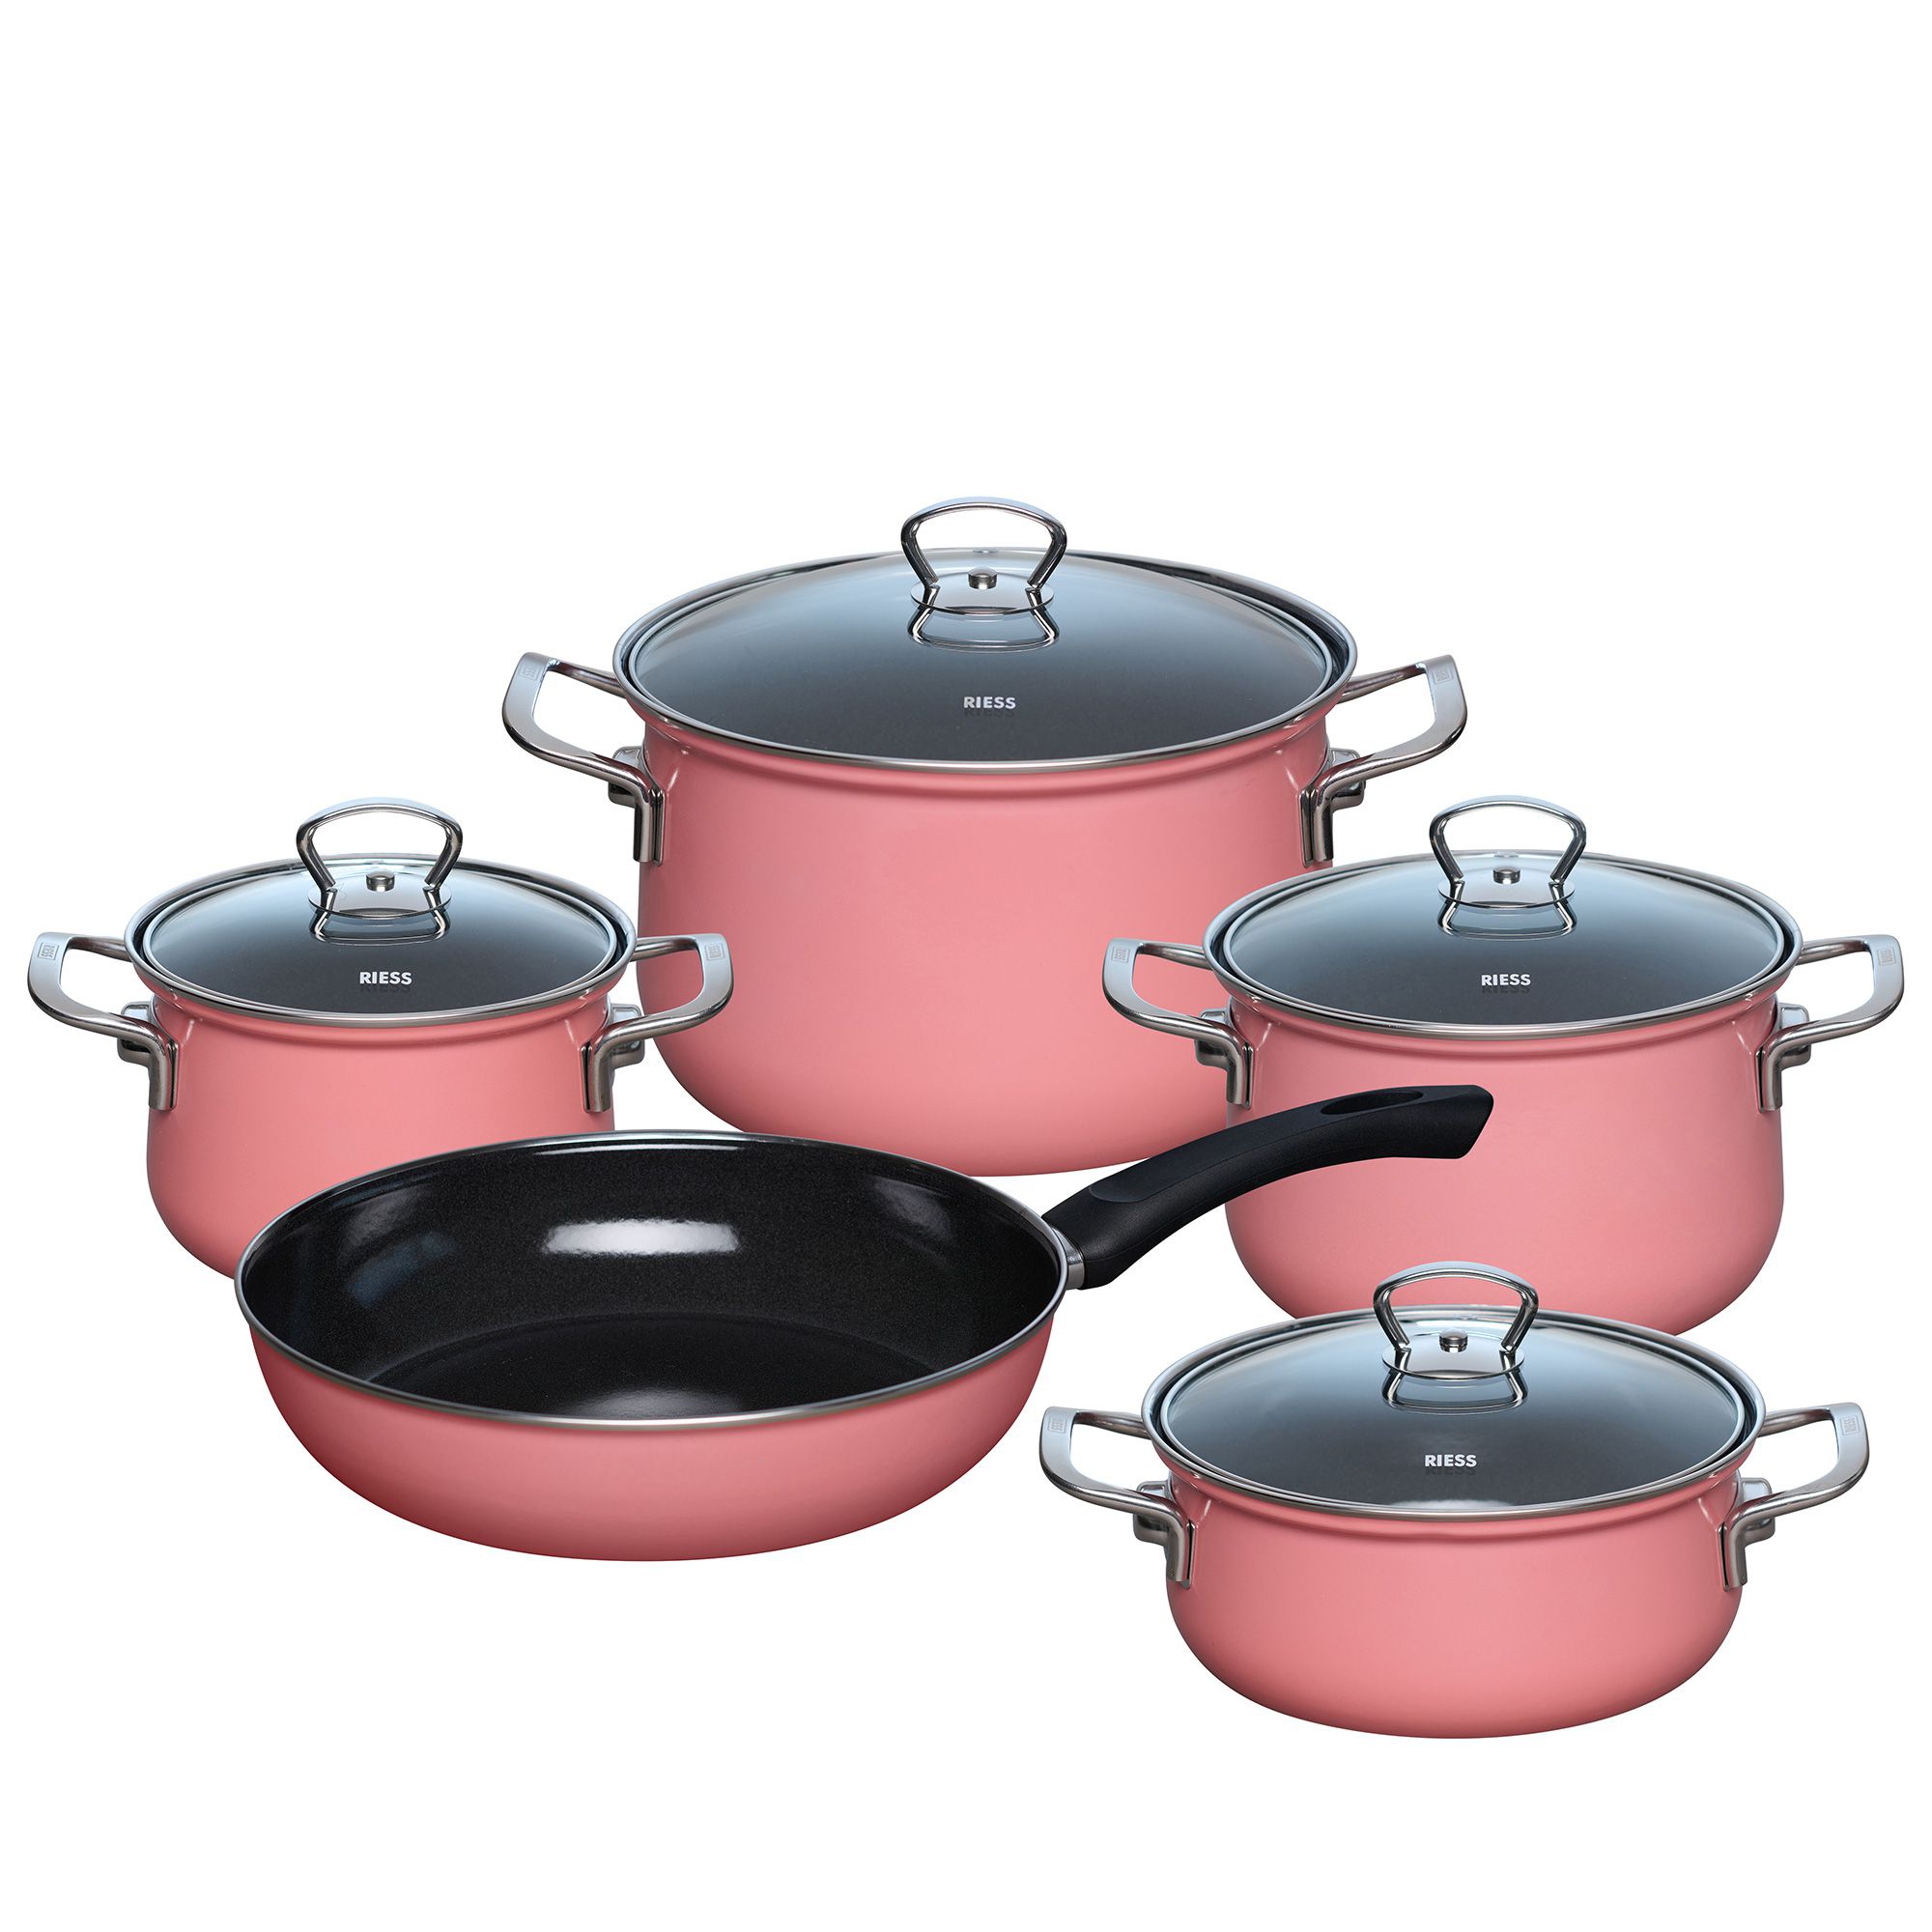 Riess NOUVELLE - Pink - Crockery set of 5